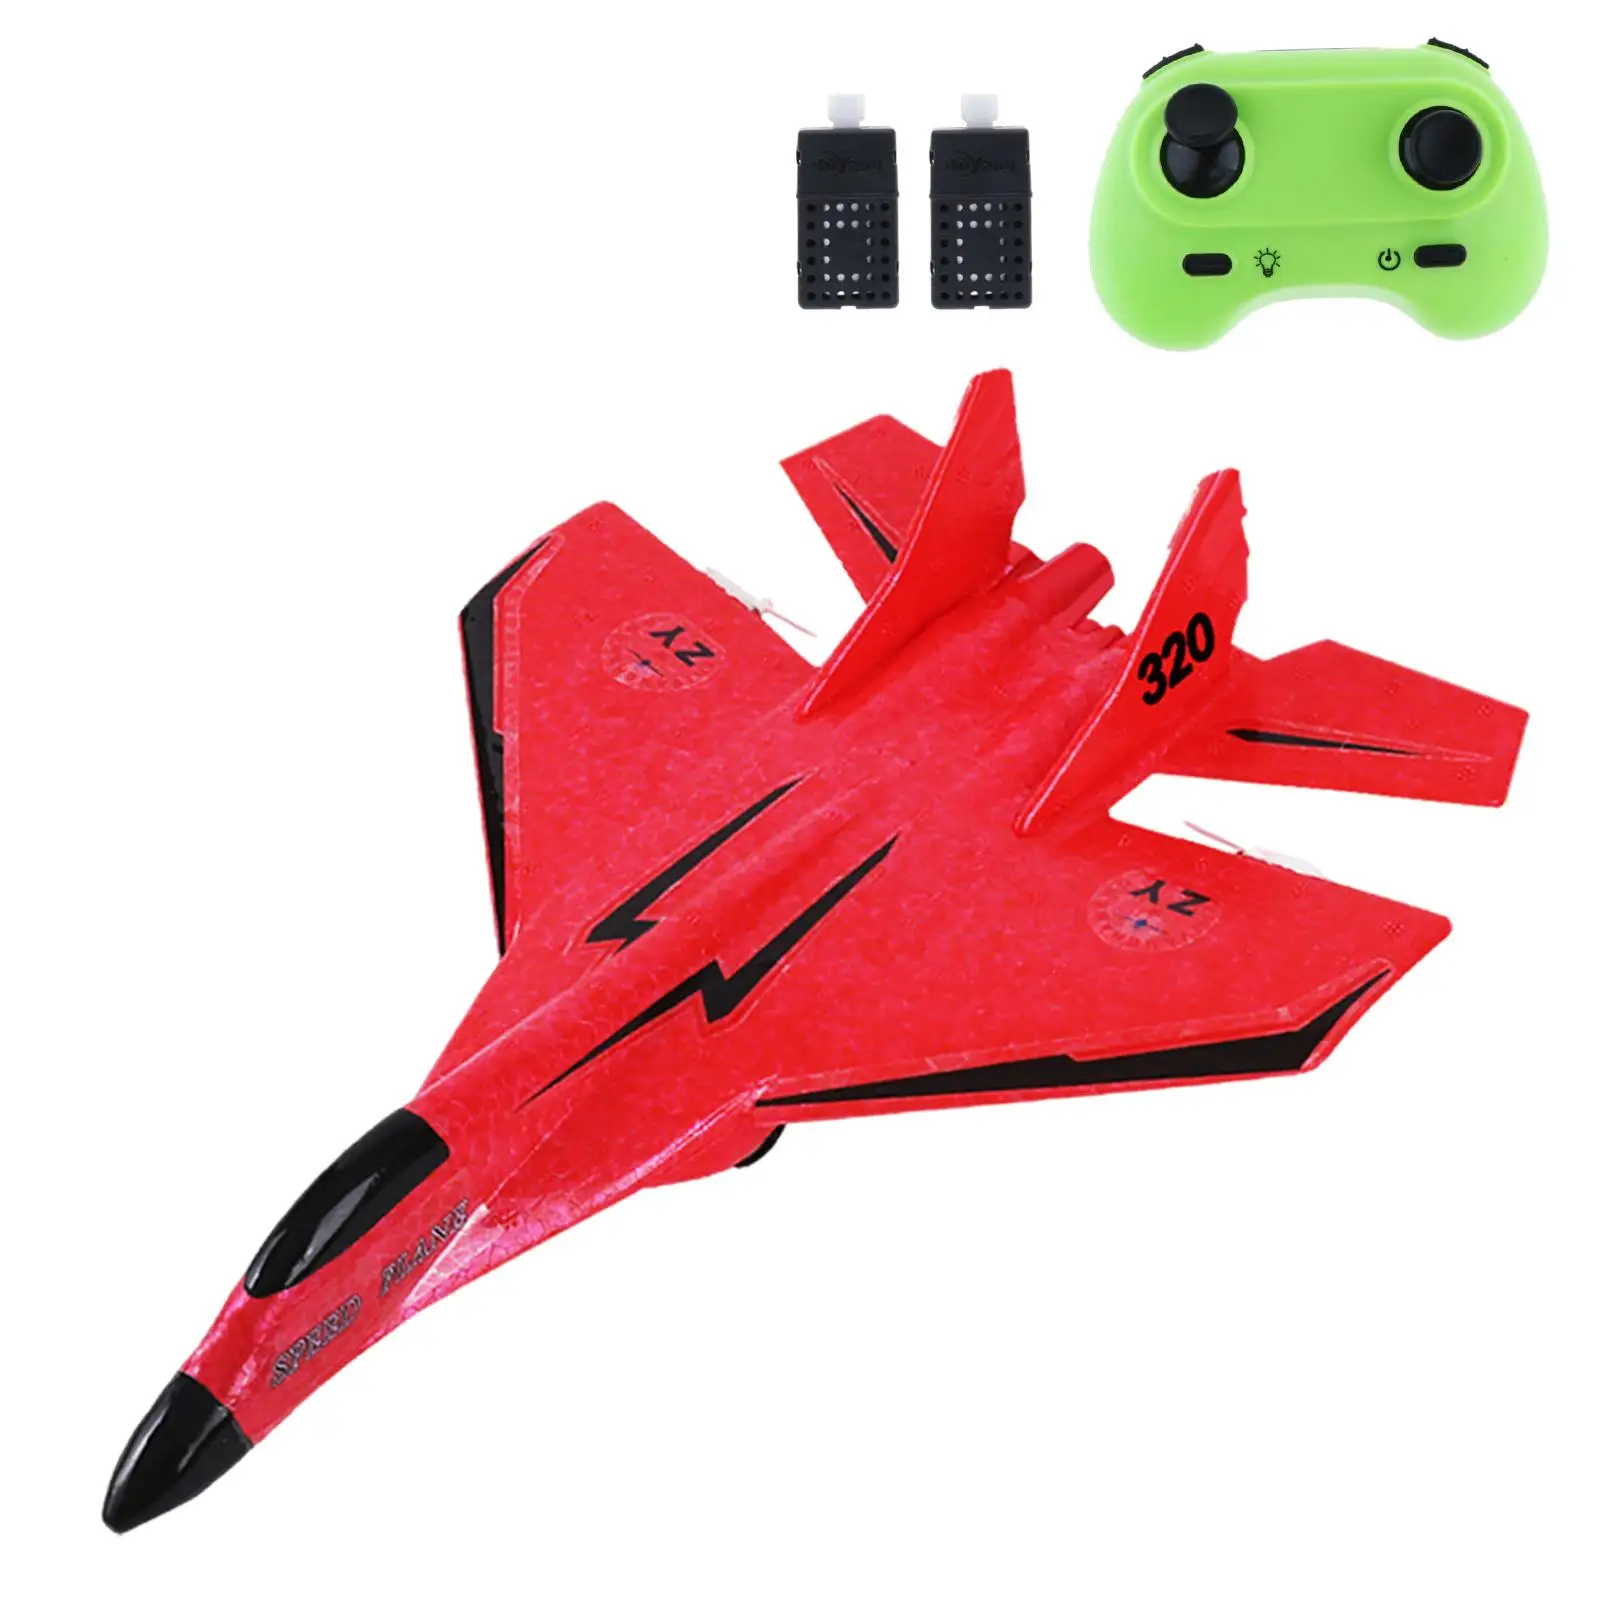 2 CH RC Plane Ready to Fly Gift Easy to Fly Outdoor Flighting Toys Portable Foam RC Airplane RC Glider for Adults Beginner Kids